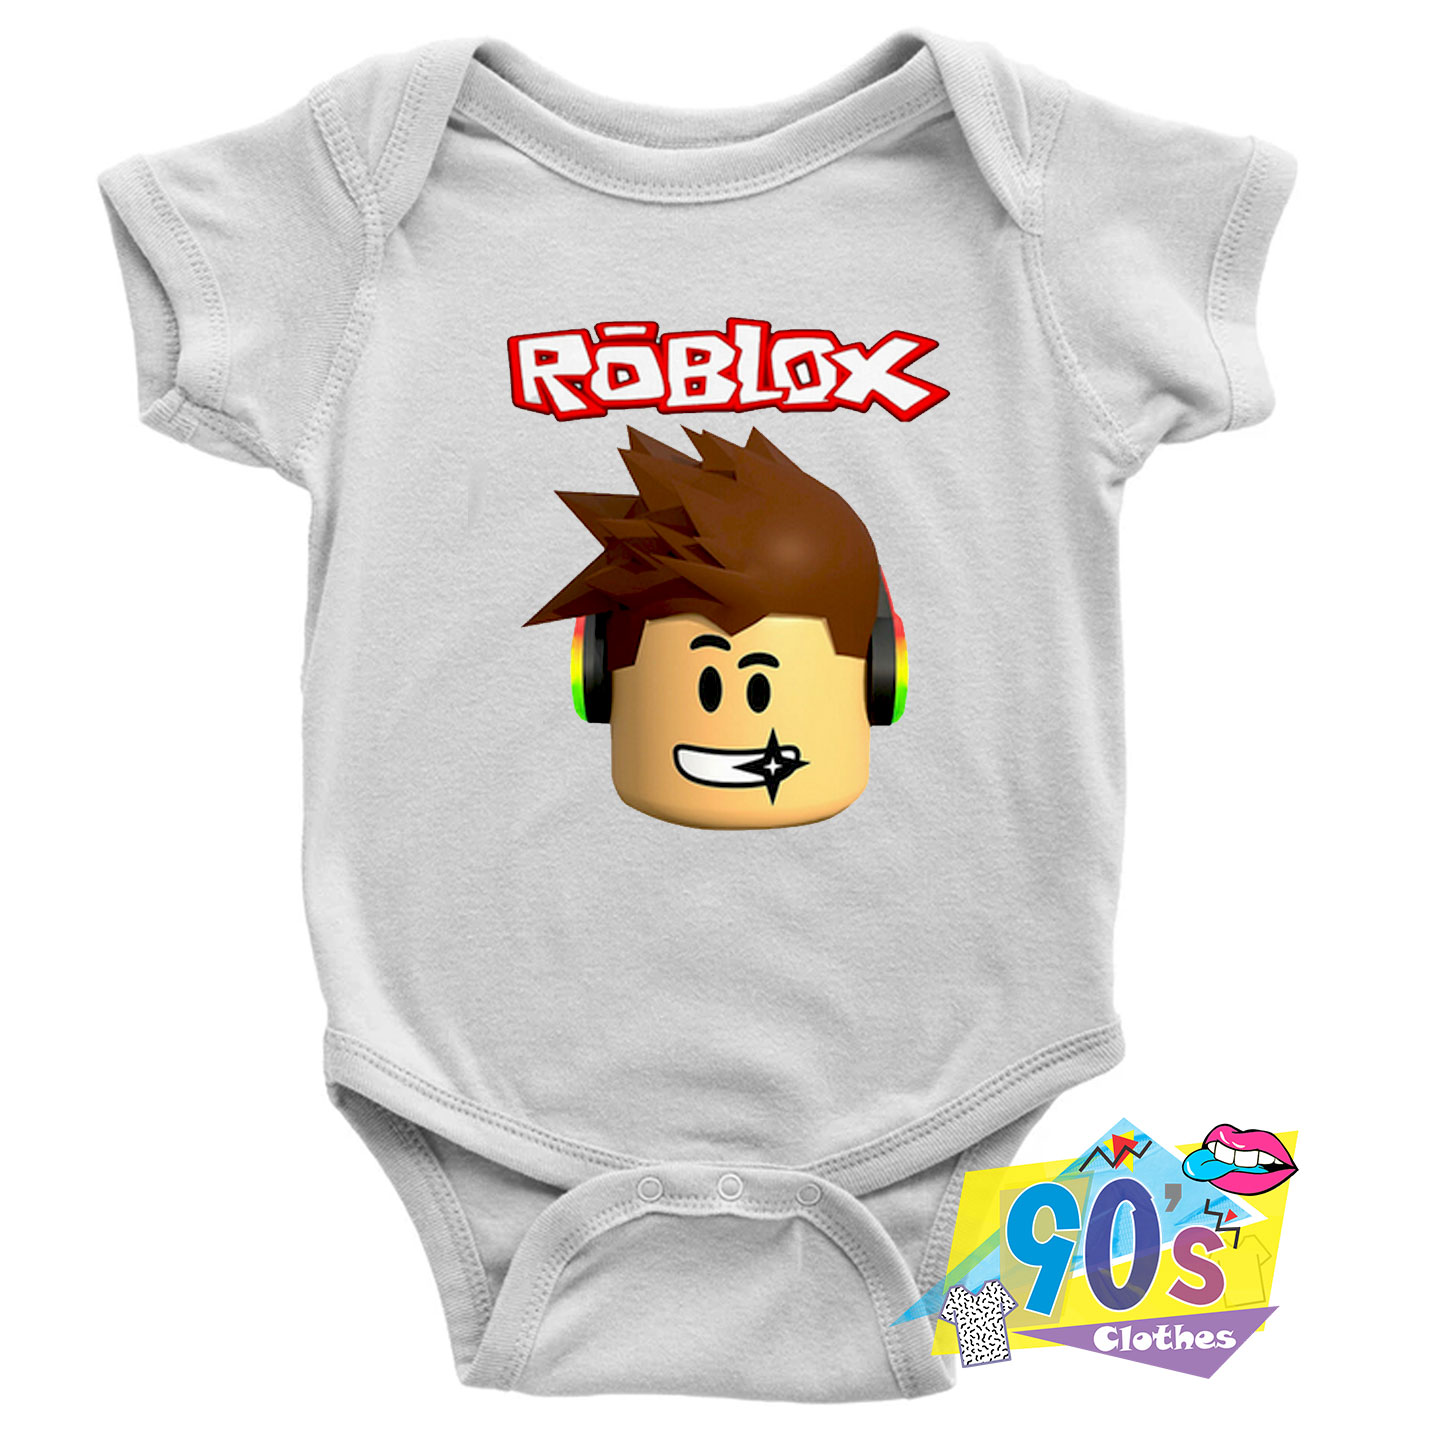 Roblox Characters Cartoon Baby Onesie Baby Clothes 90sclothes Com - t 90 roblox